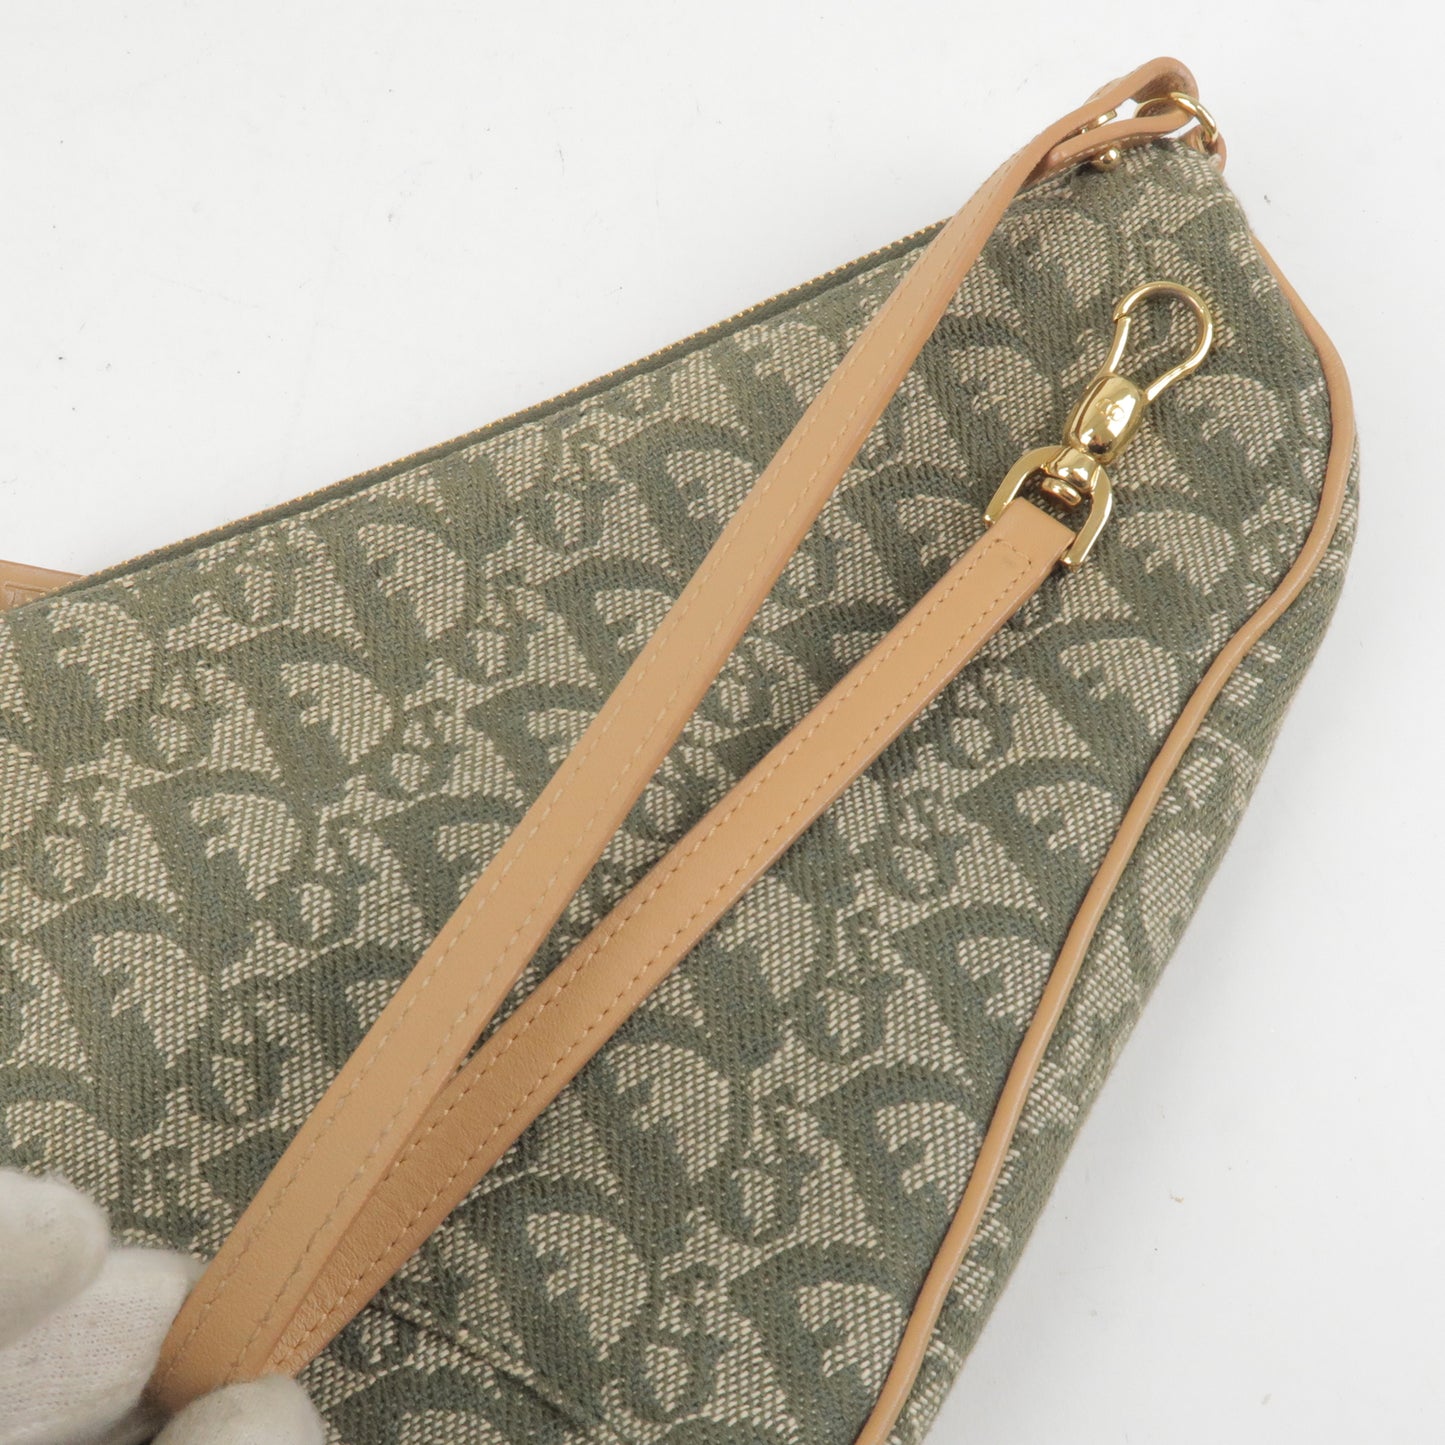 Christian Dior Trotter Canvas Leather Saddle Bag Pouch Green Beige